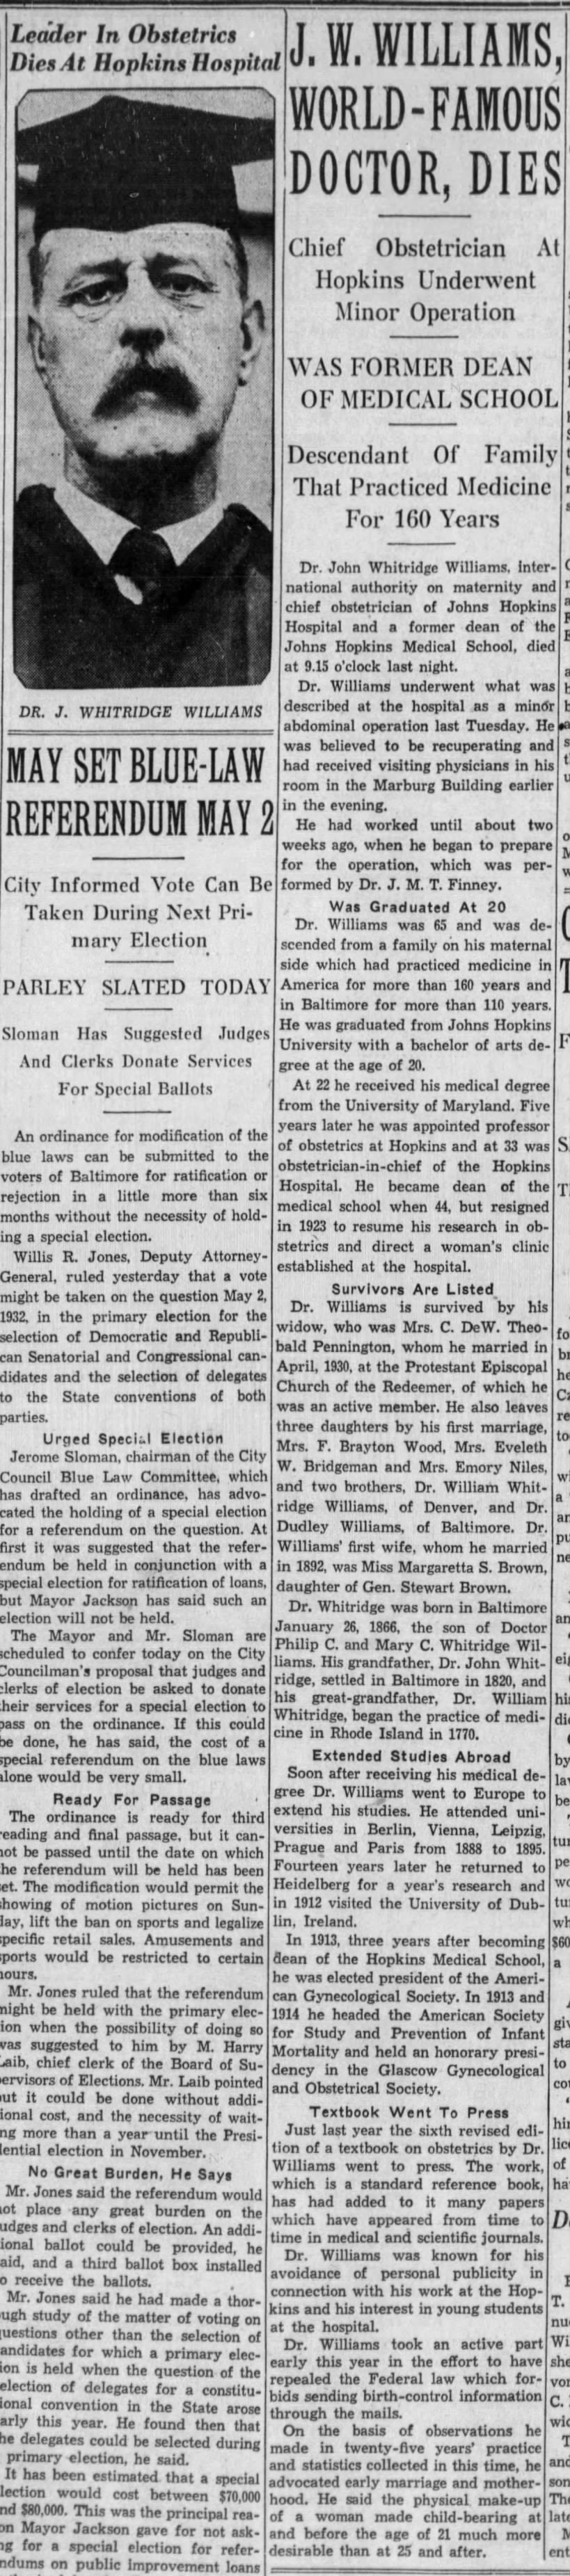 J. W. Williams, World-Famous Doctor, Dies; 22 Oct 1931; The Baltimore Sun; 24